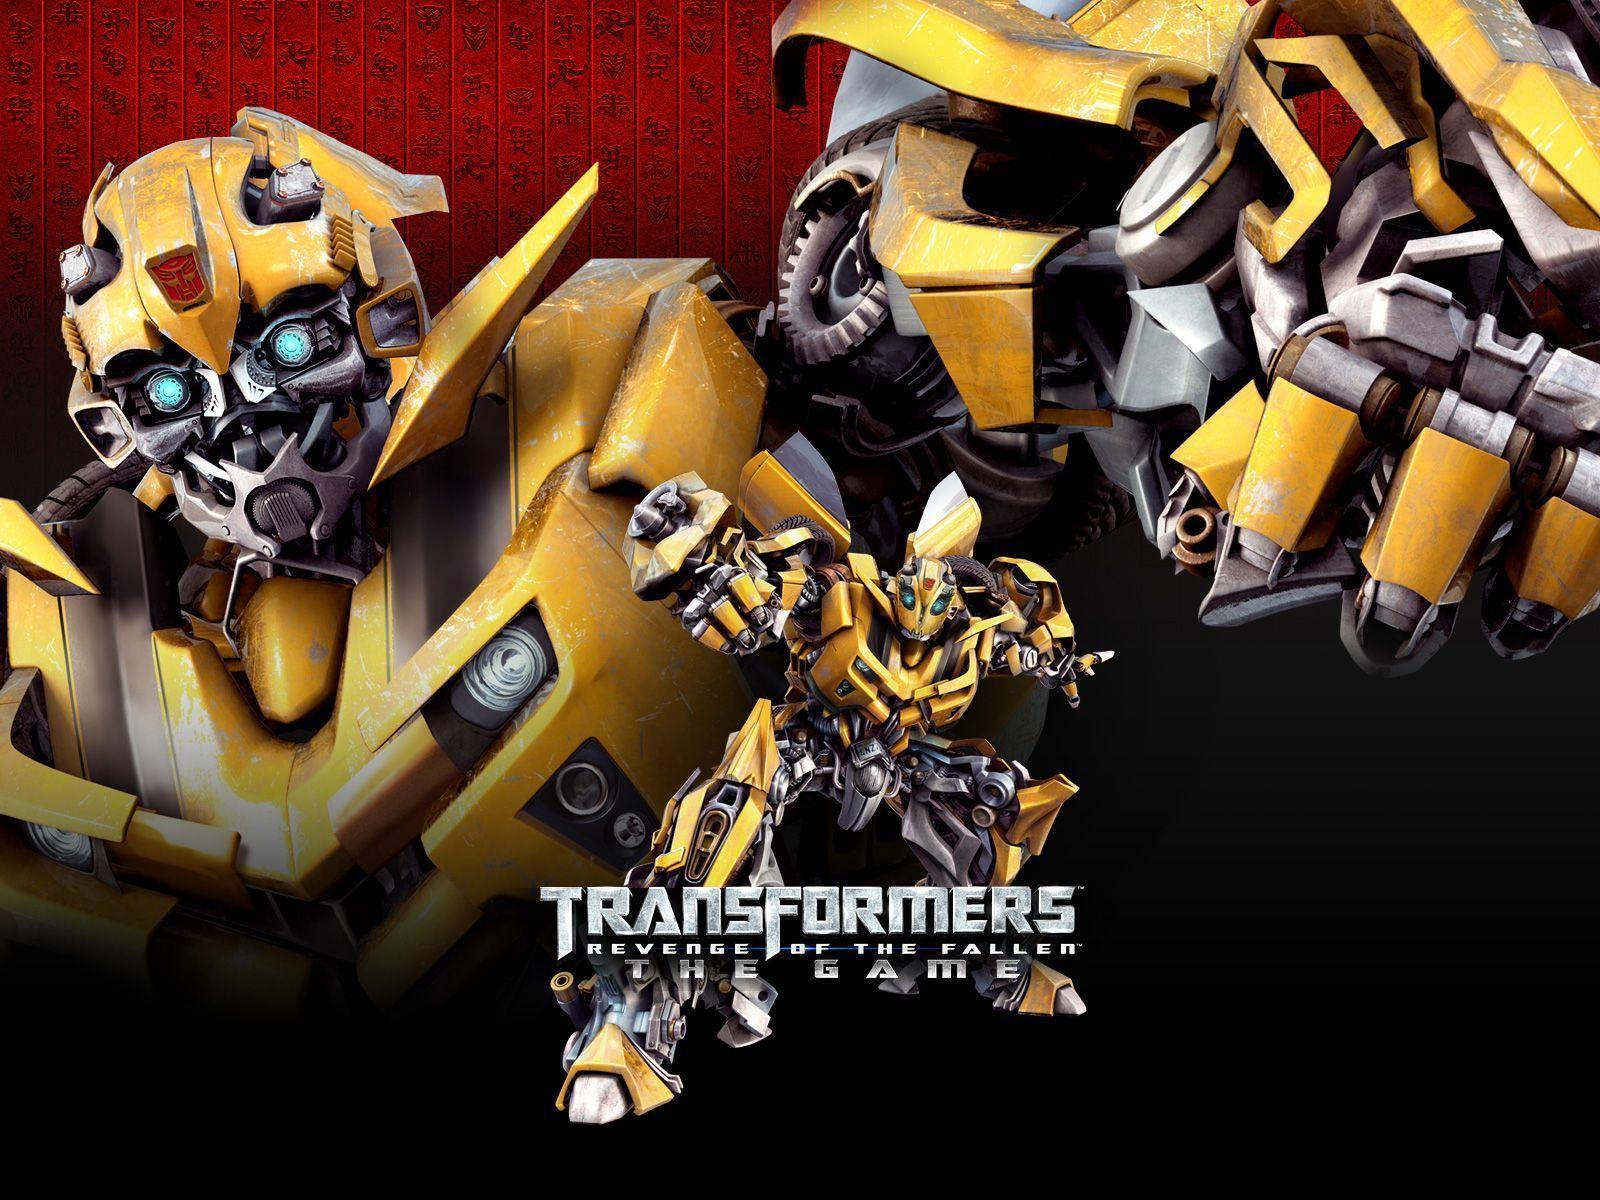 Transformers Wallpaper Bumblebee Background Picture HD Download